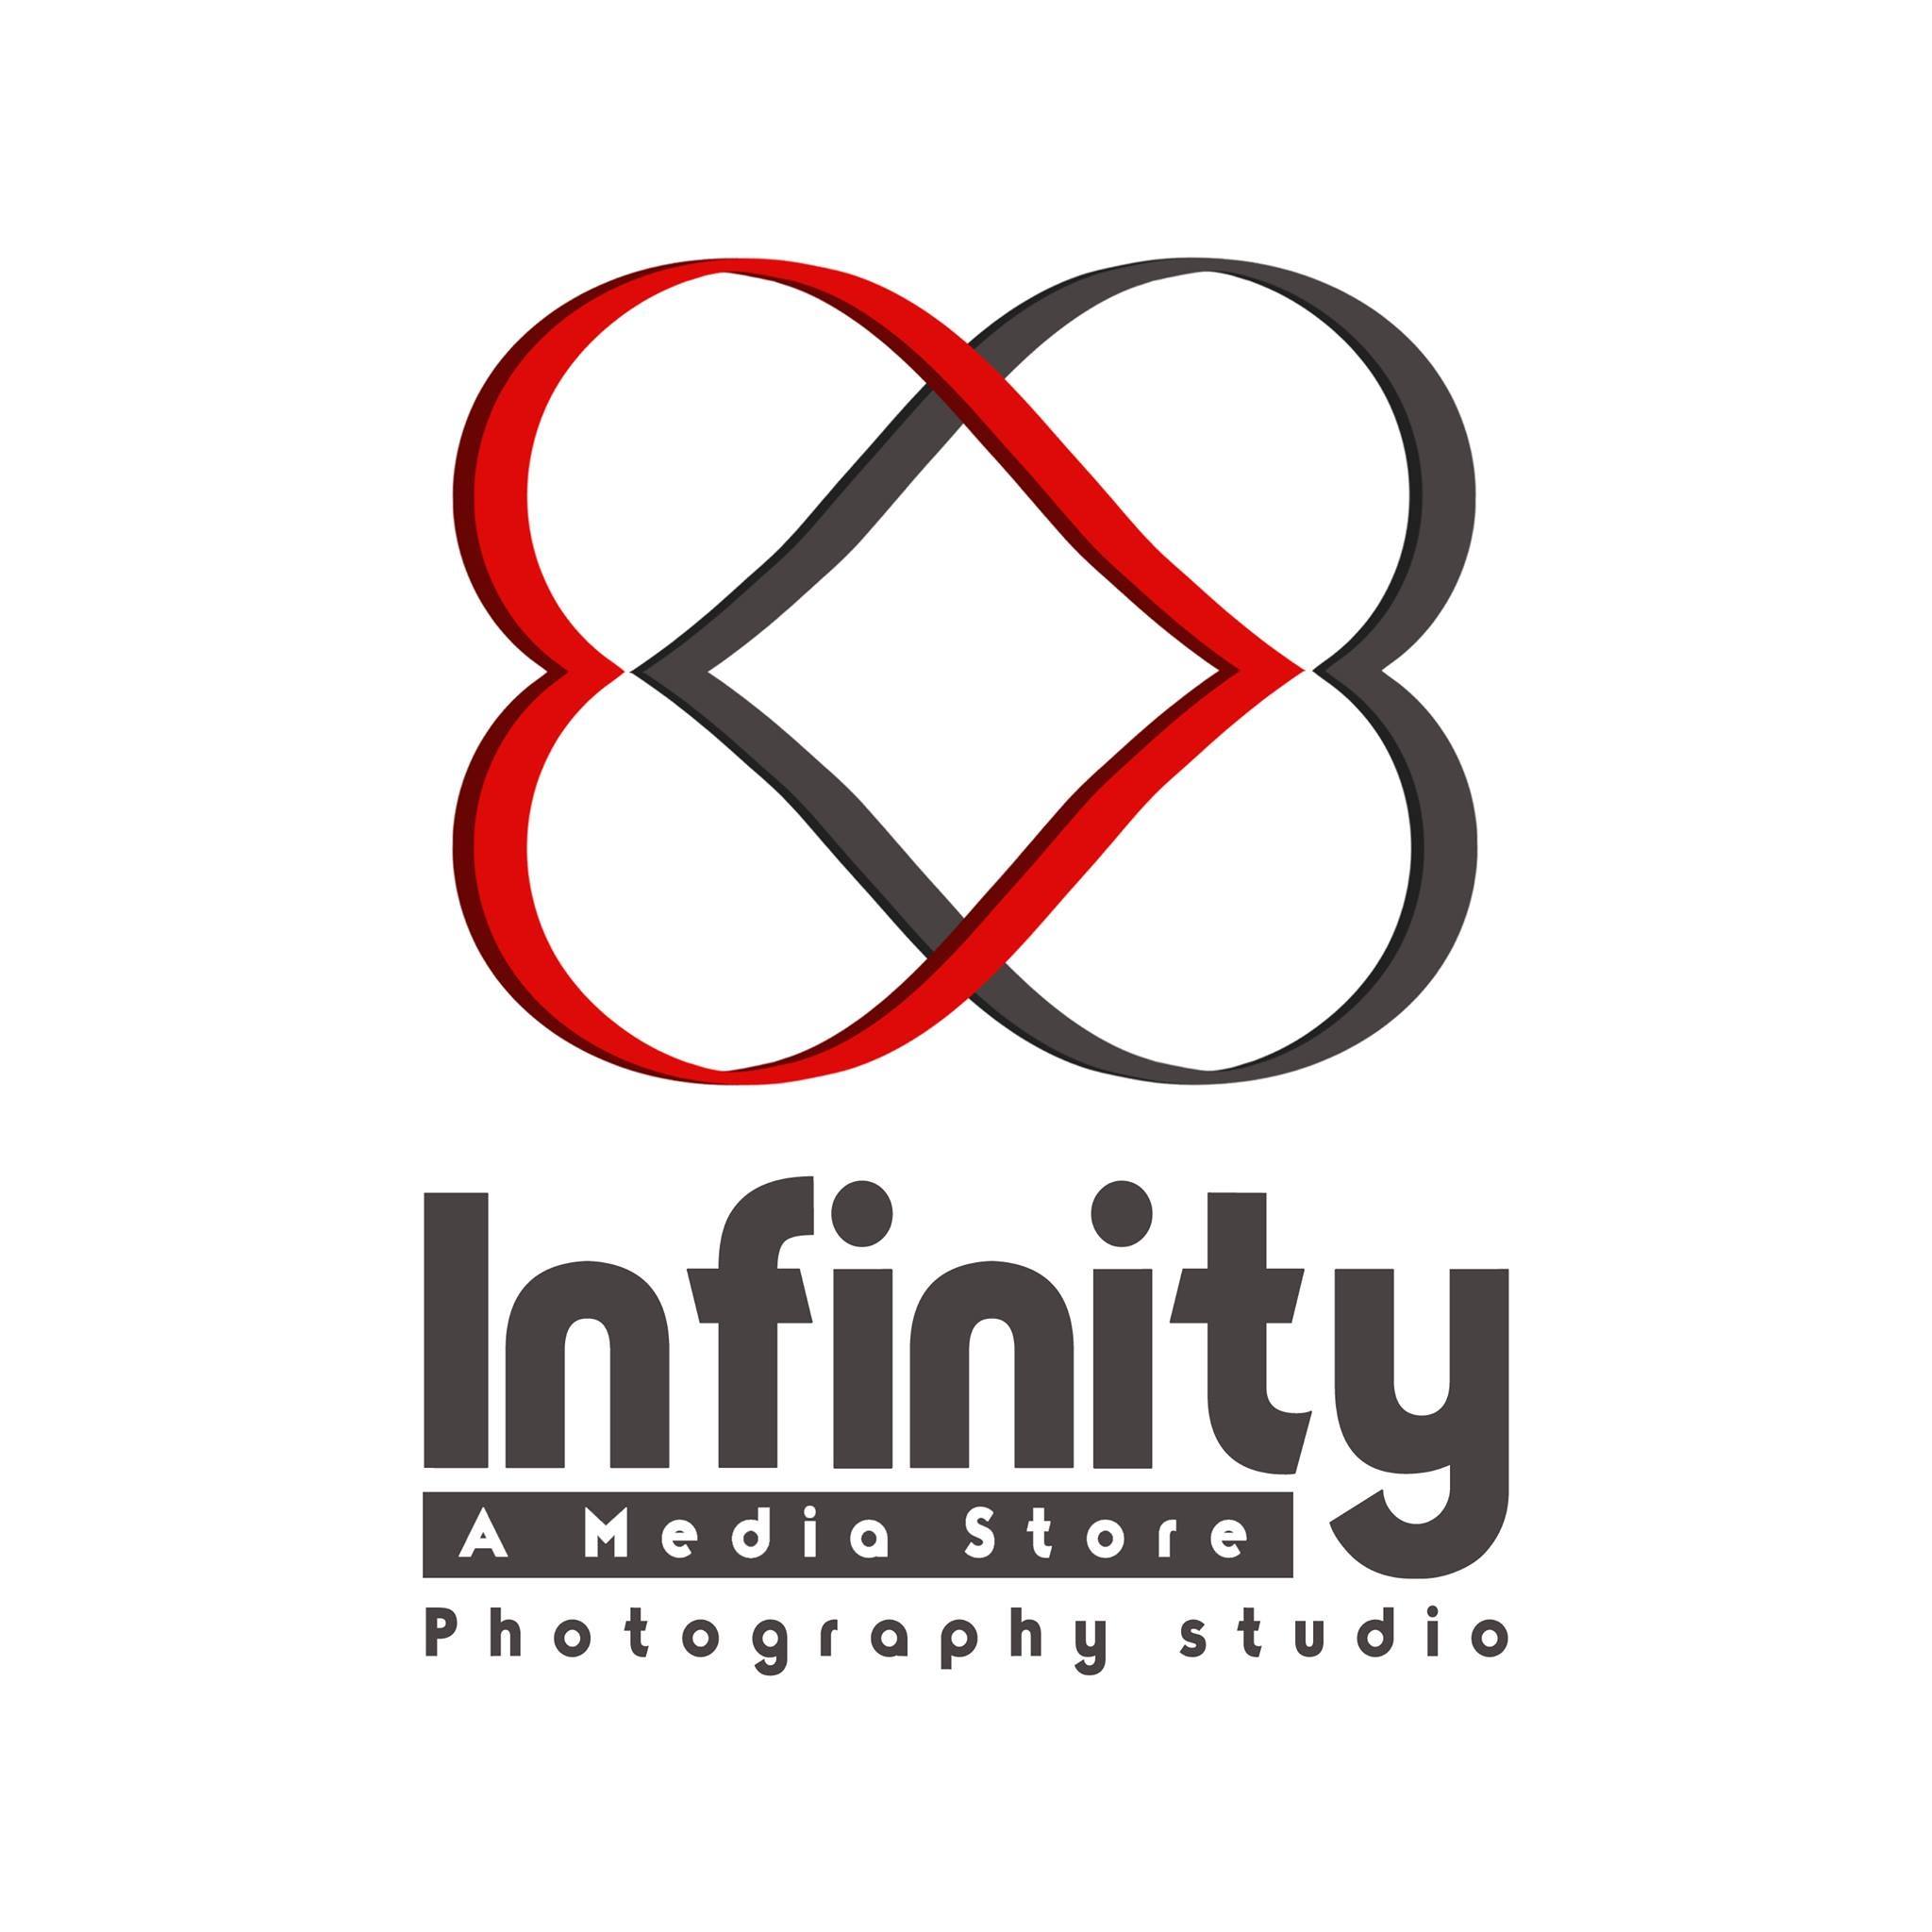 Infinity A Media Store Photography Studio|Wedding Planner|Event Services